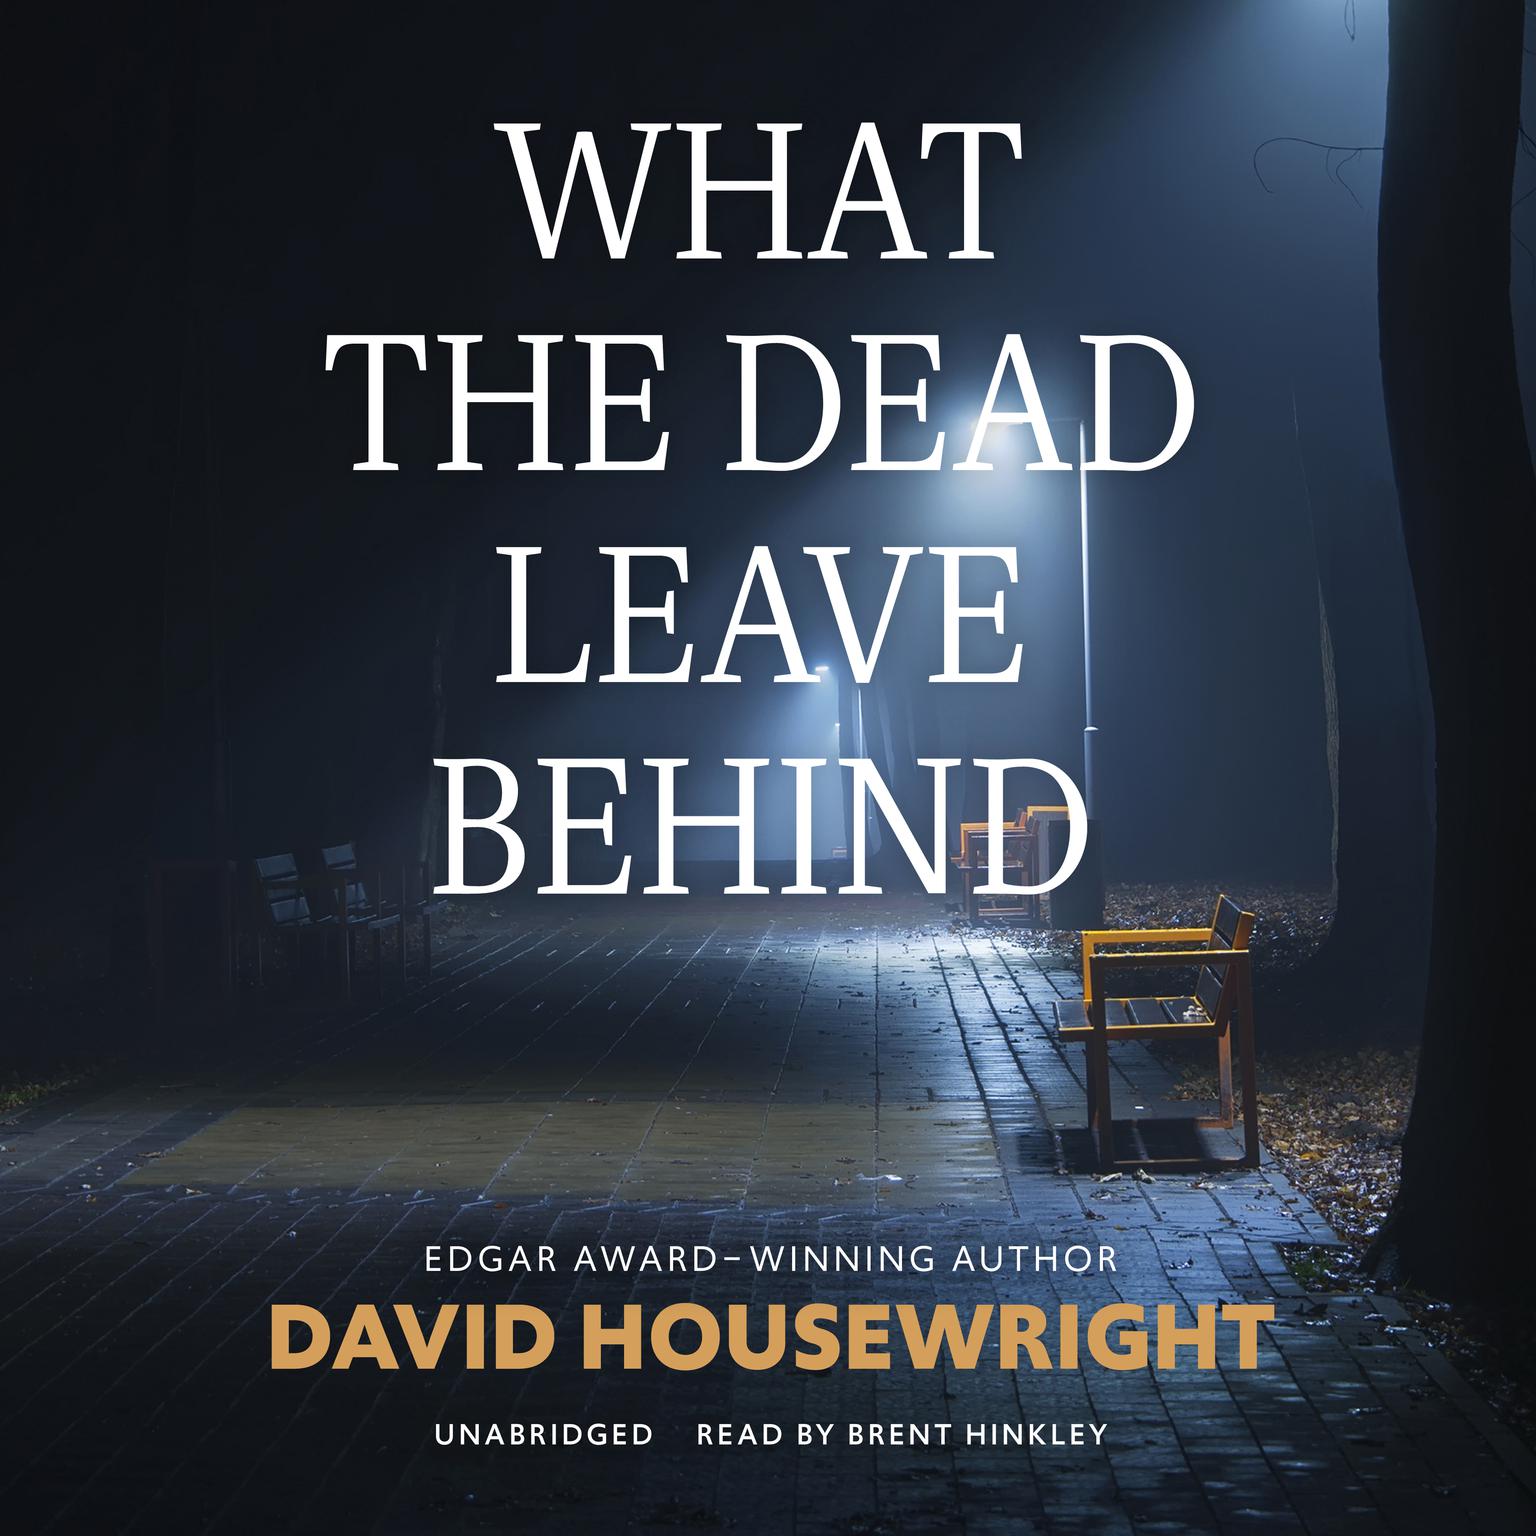 What the Dead Leave Behind Audiobook, by David Housewright